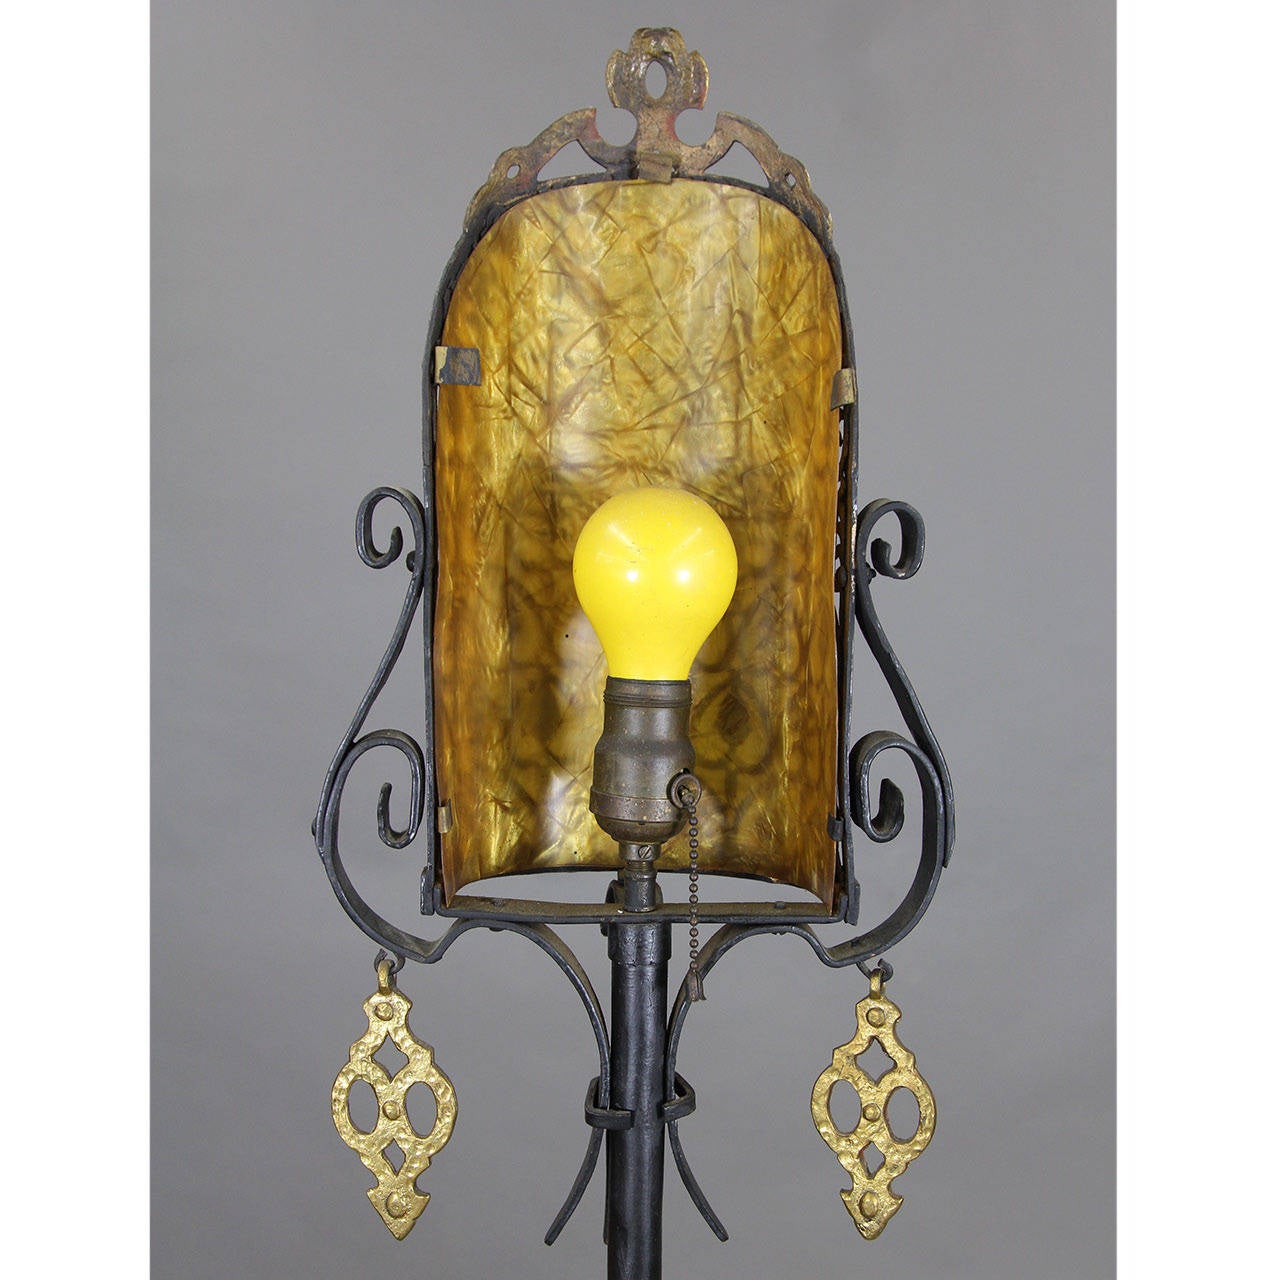 Unknown Pair of Wrought Iron Floor Lamps with Celluloid Shade Liners